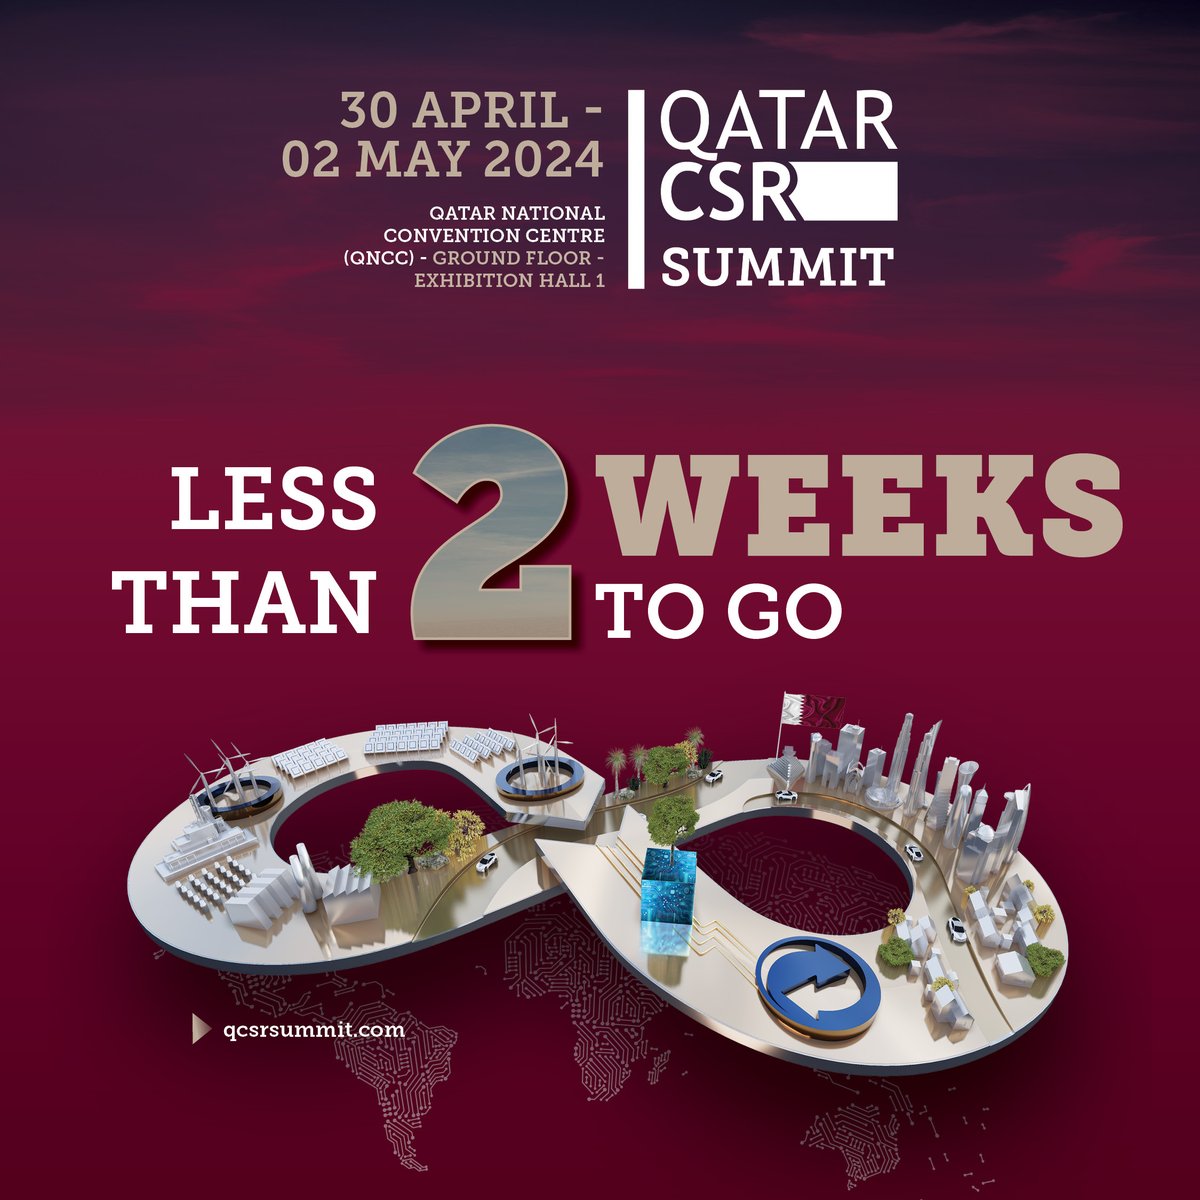 Only a few days left until Qatar CSR Summit 2024! This is your opportunity to connect with industry giants and discover the latest in CSR practices. Join us from 30 Apr - 2 May at Qatar National Convention Centre (QNCC) - Hall 1. Register your free visit now